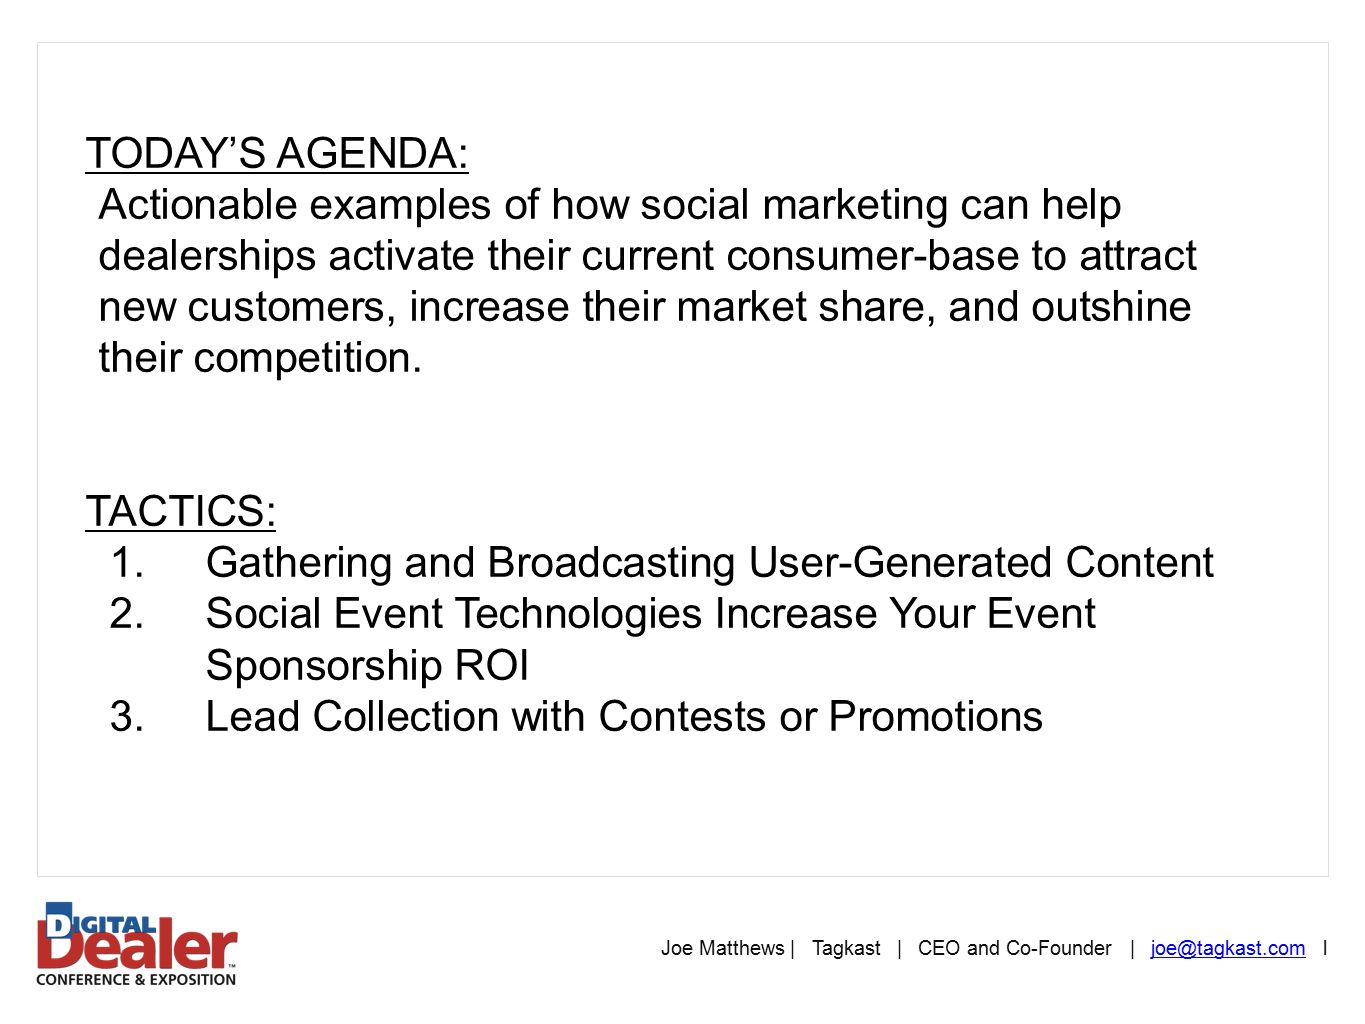 TODAY’S AGENDA: Actionable examples of how social marketing can help dealerships activate their current consumer-base to attract new customers, increase their market share, and outshine their competition.